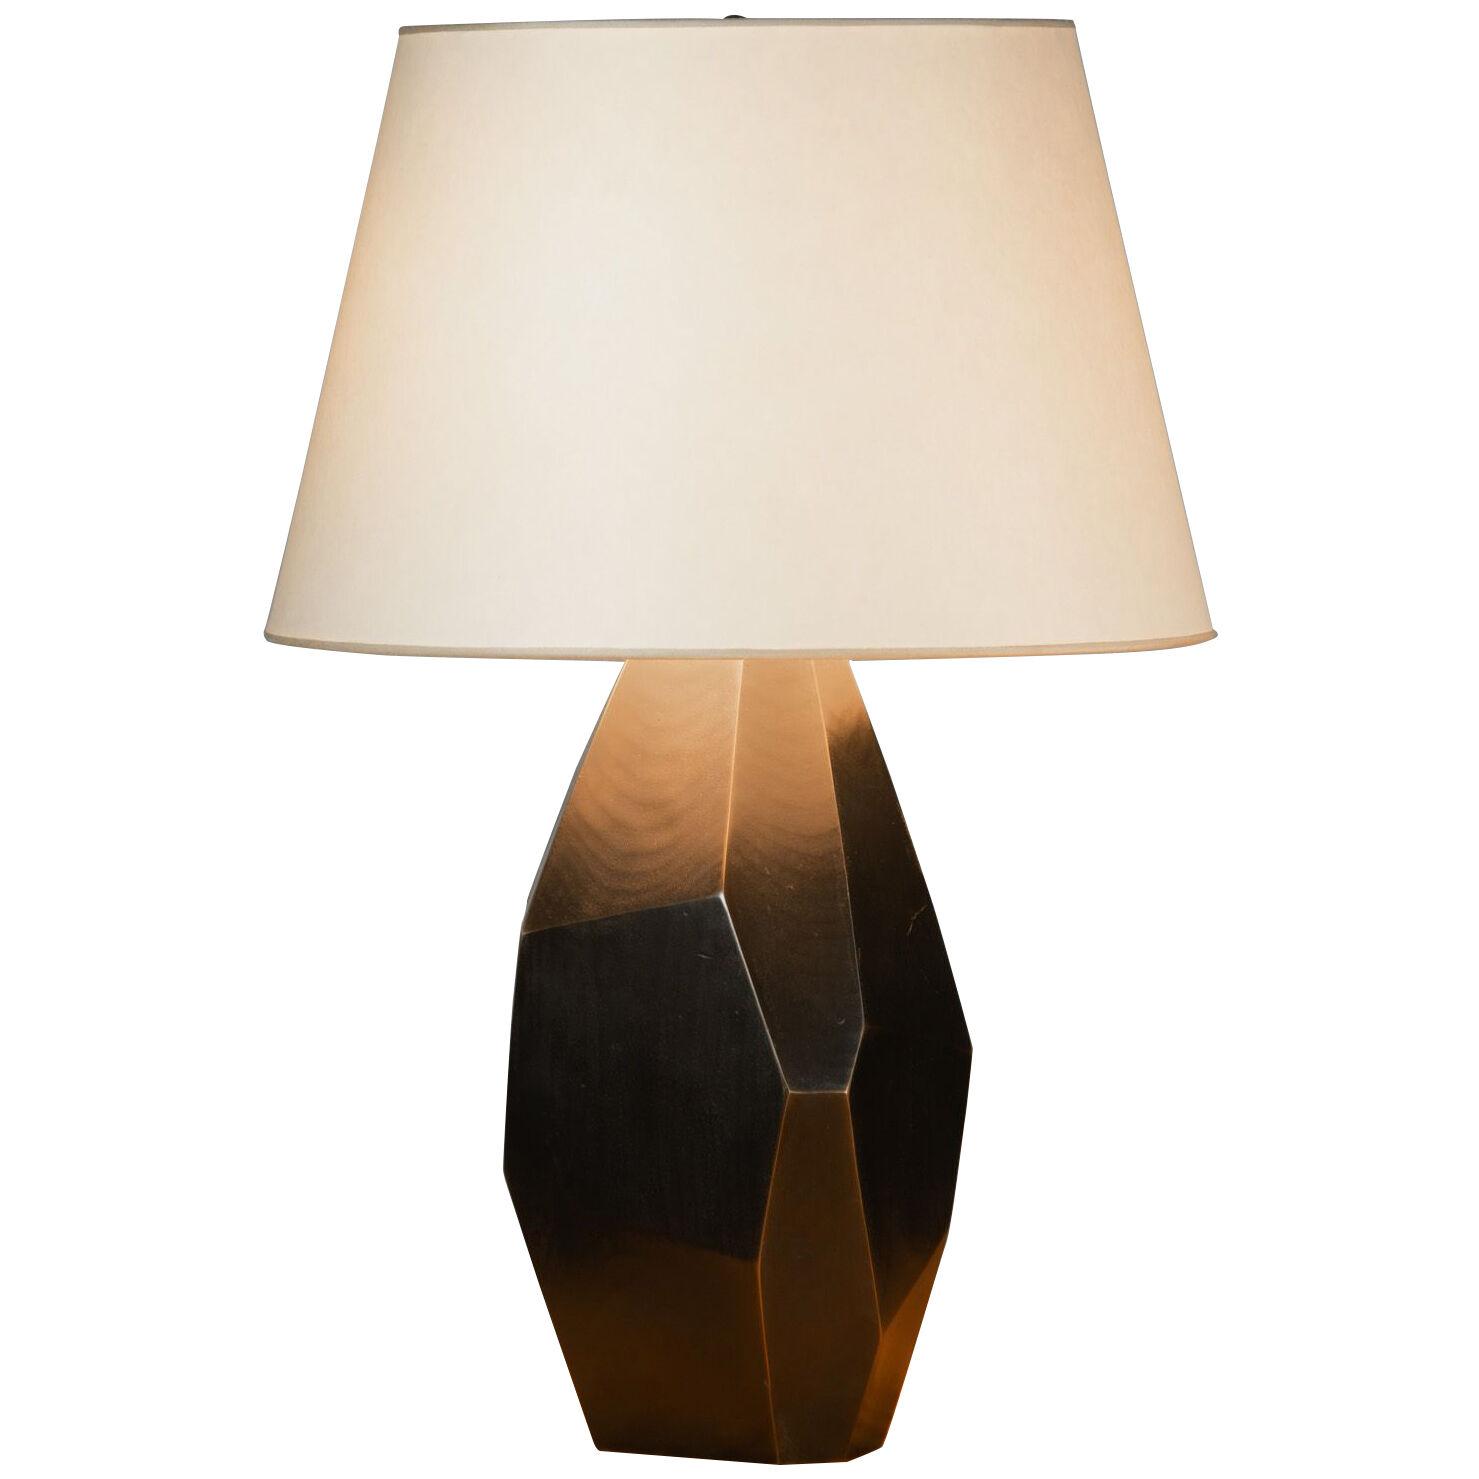 Large Table Lamp " Nazca"